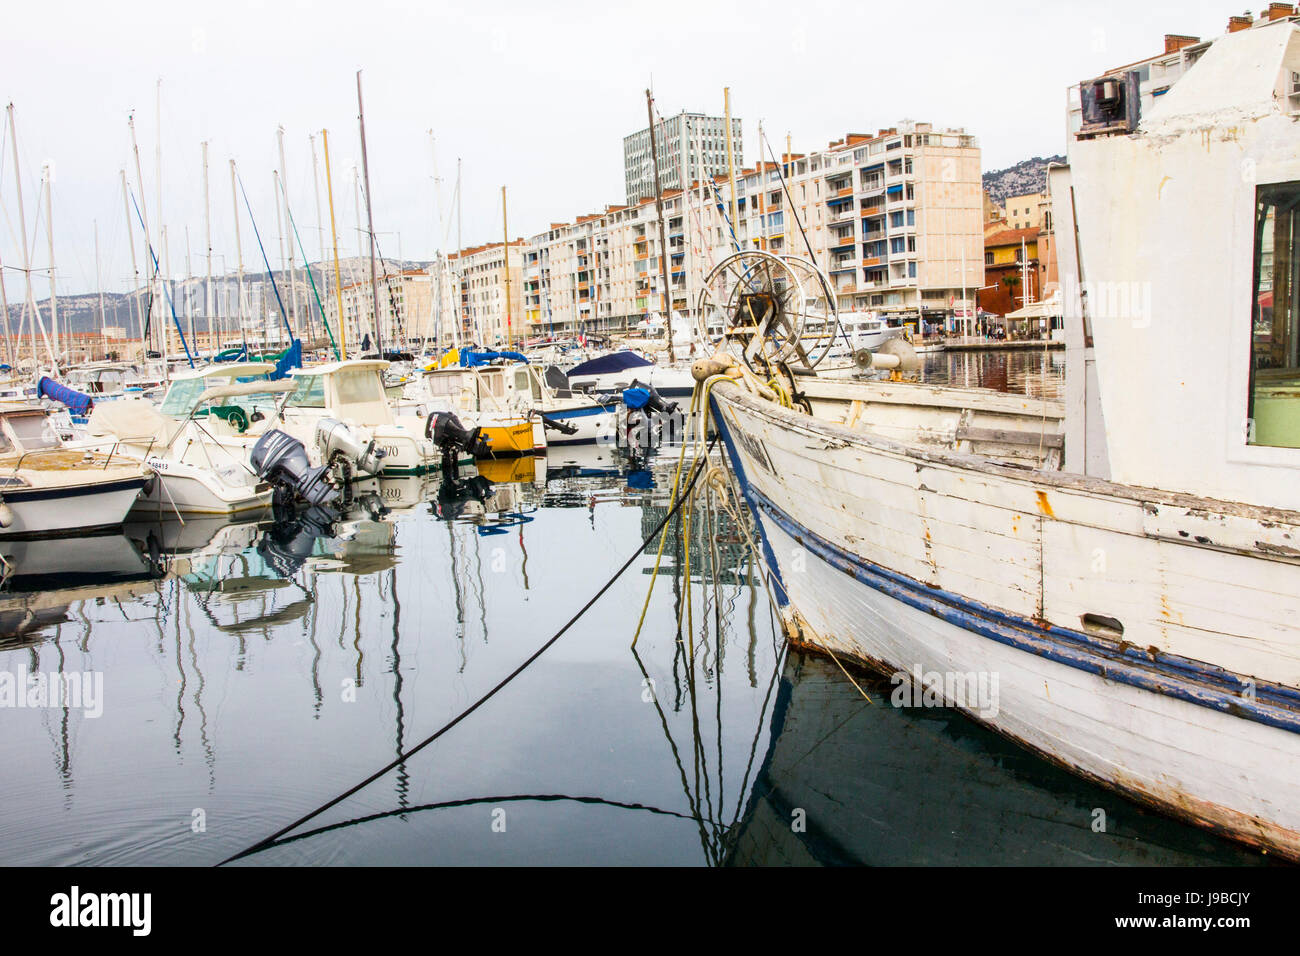 Fishing boats and private craft share the marina in the port city of Toulon, France. Stock Photo